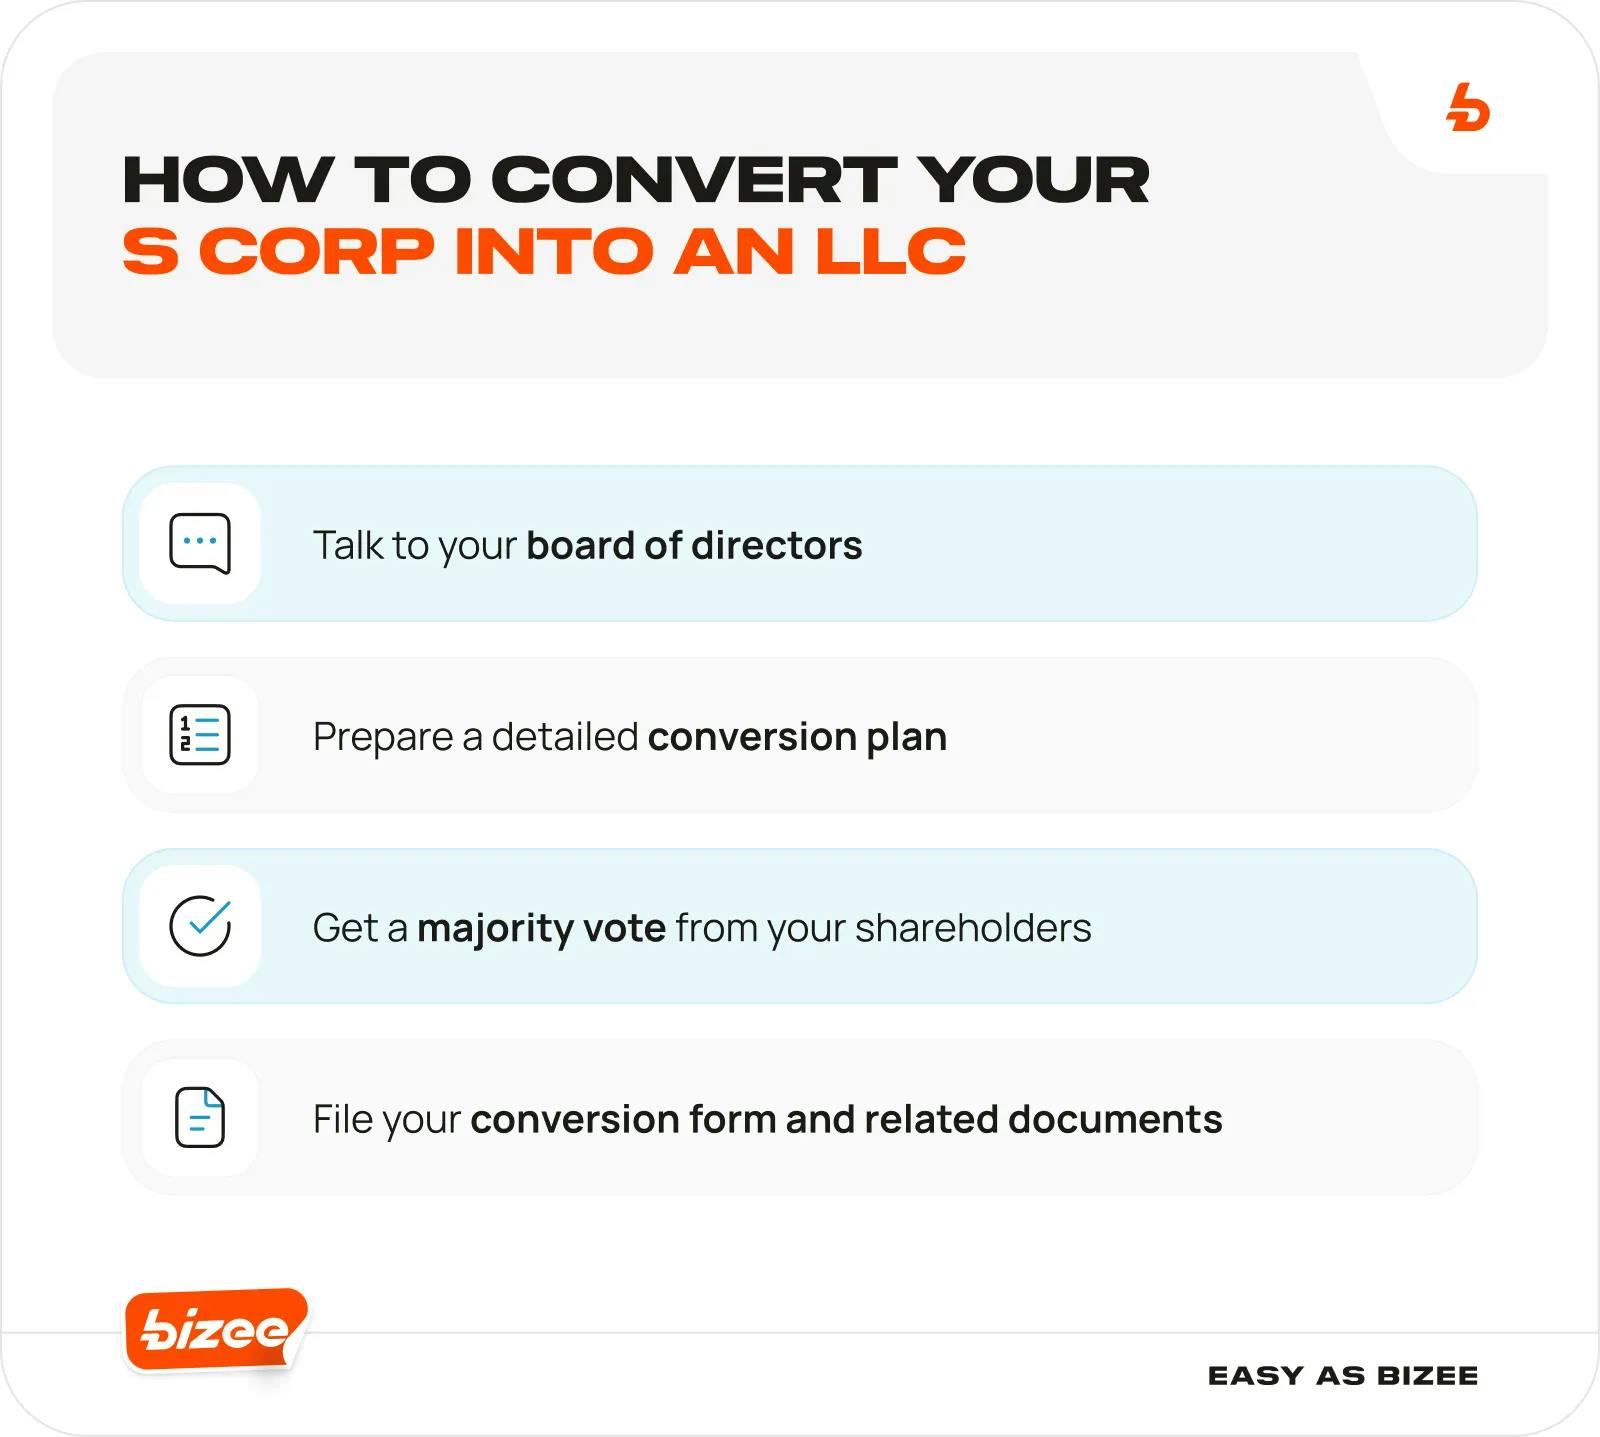 How to Convert Your S Corp Into an LLC